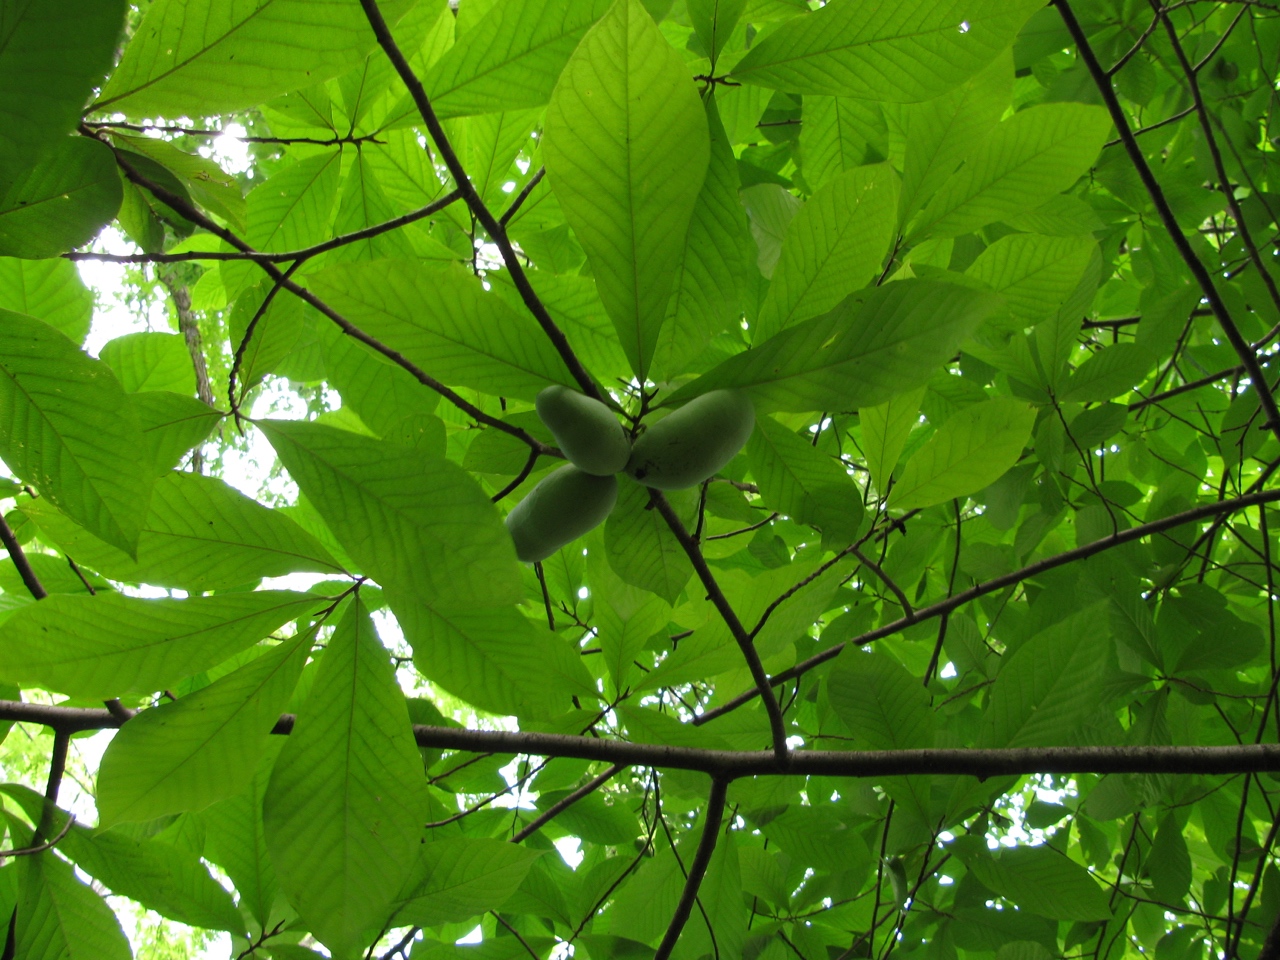 The Scientific Name is Asimina triloba. You will likely hear them called Pawpaw. This picture shows the Maturing fruit in July of Asimina triloba